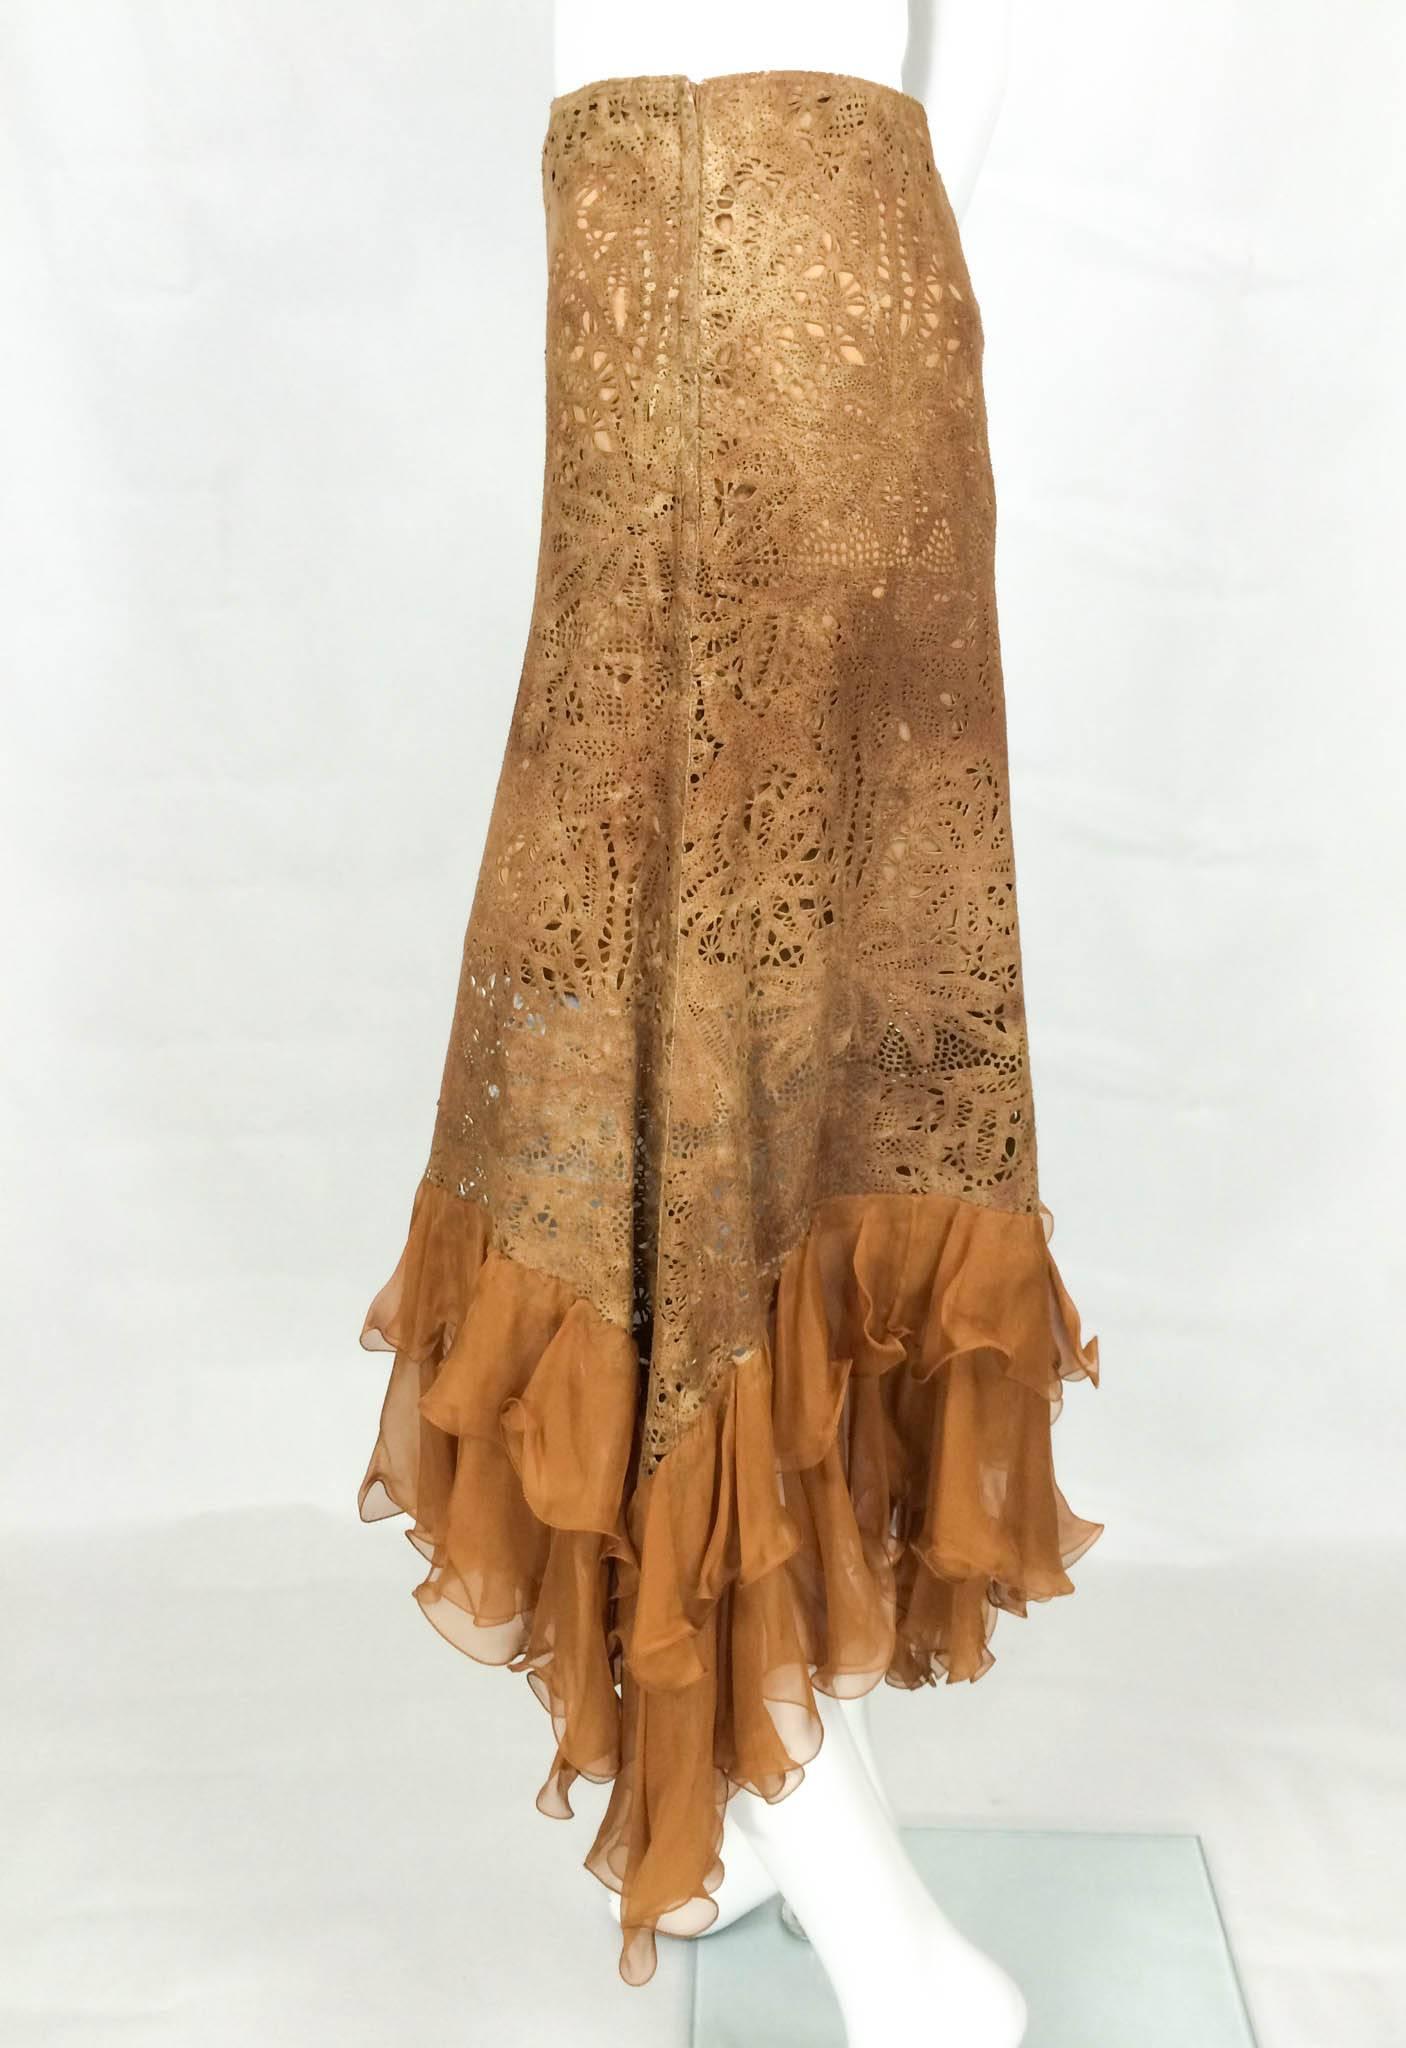 Women's Emanuel Ungaro Suede Lace and Silk Ruffles Skirt - 1990s